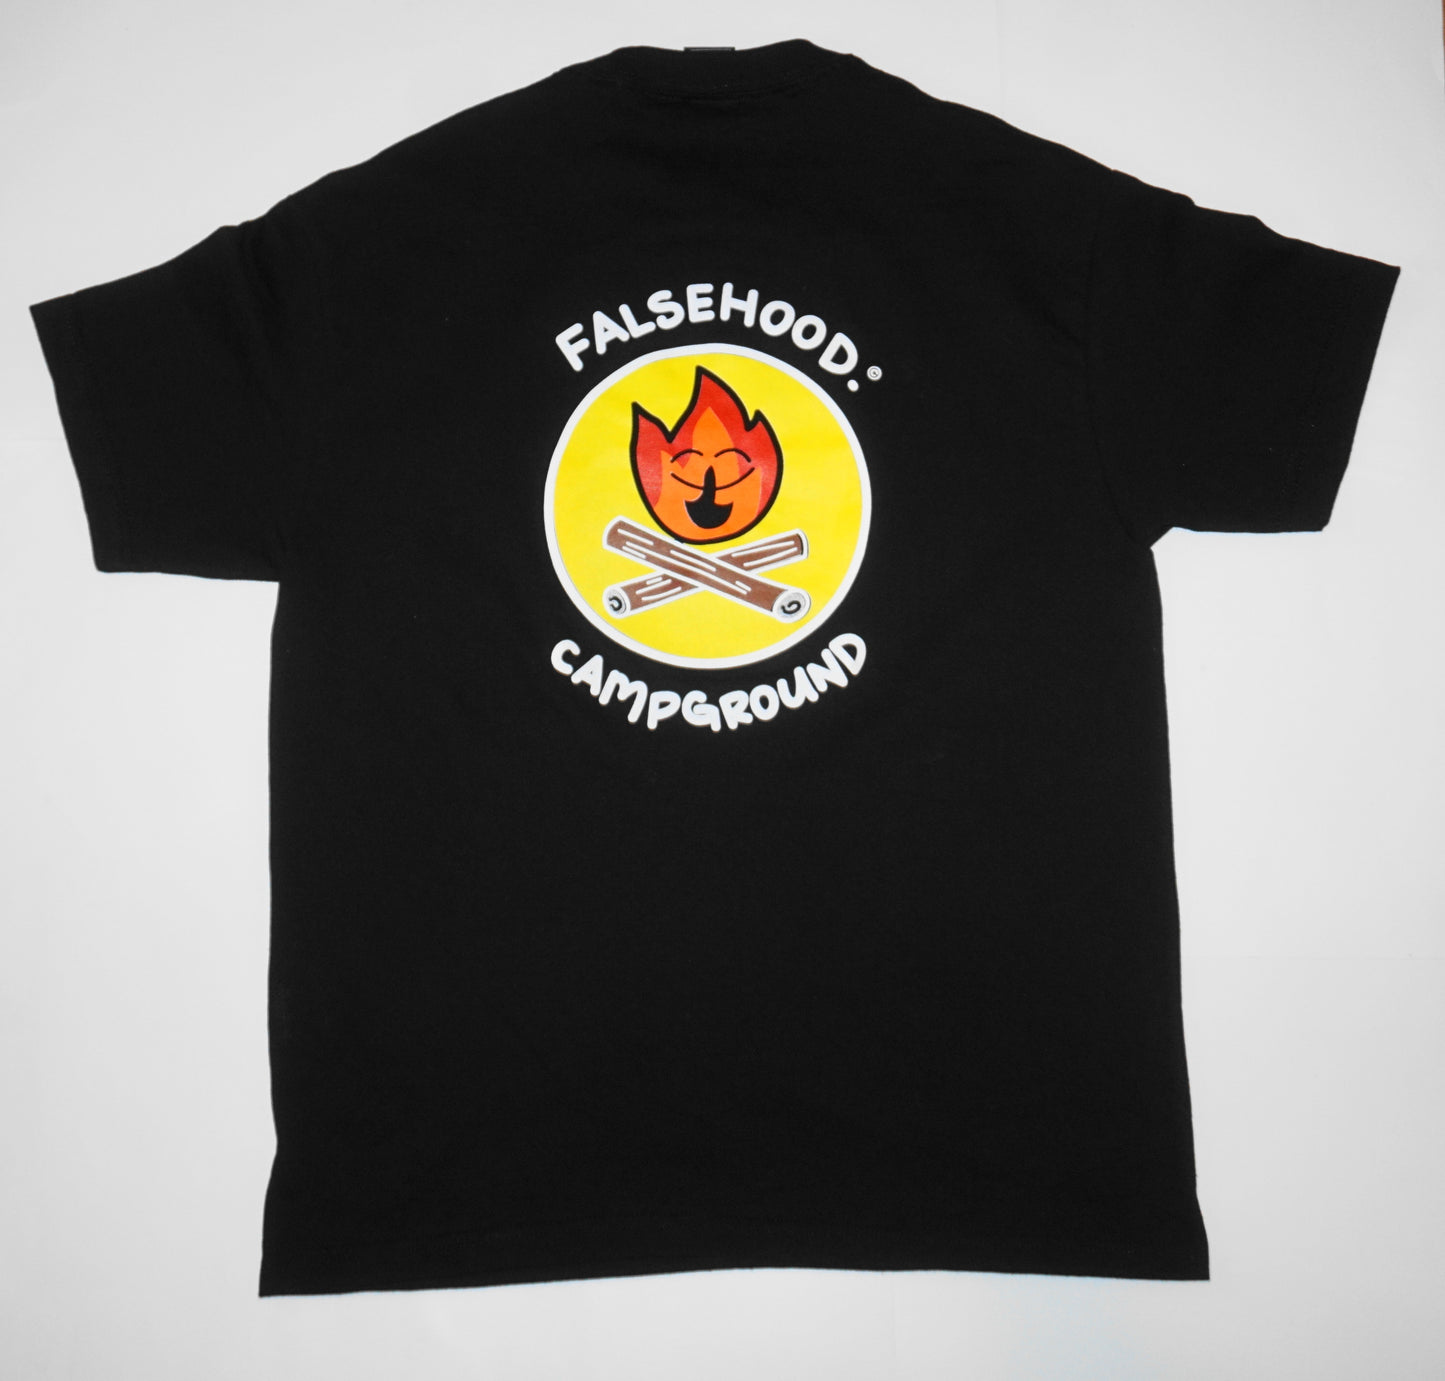 CAMPGROUND. Tee